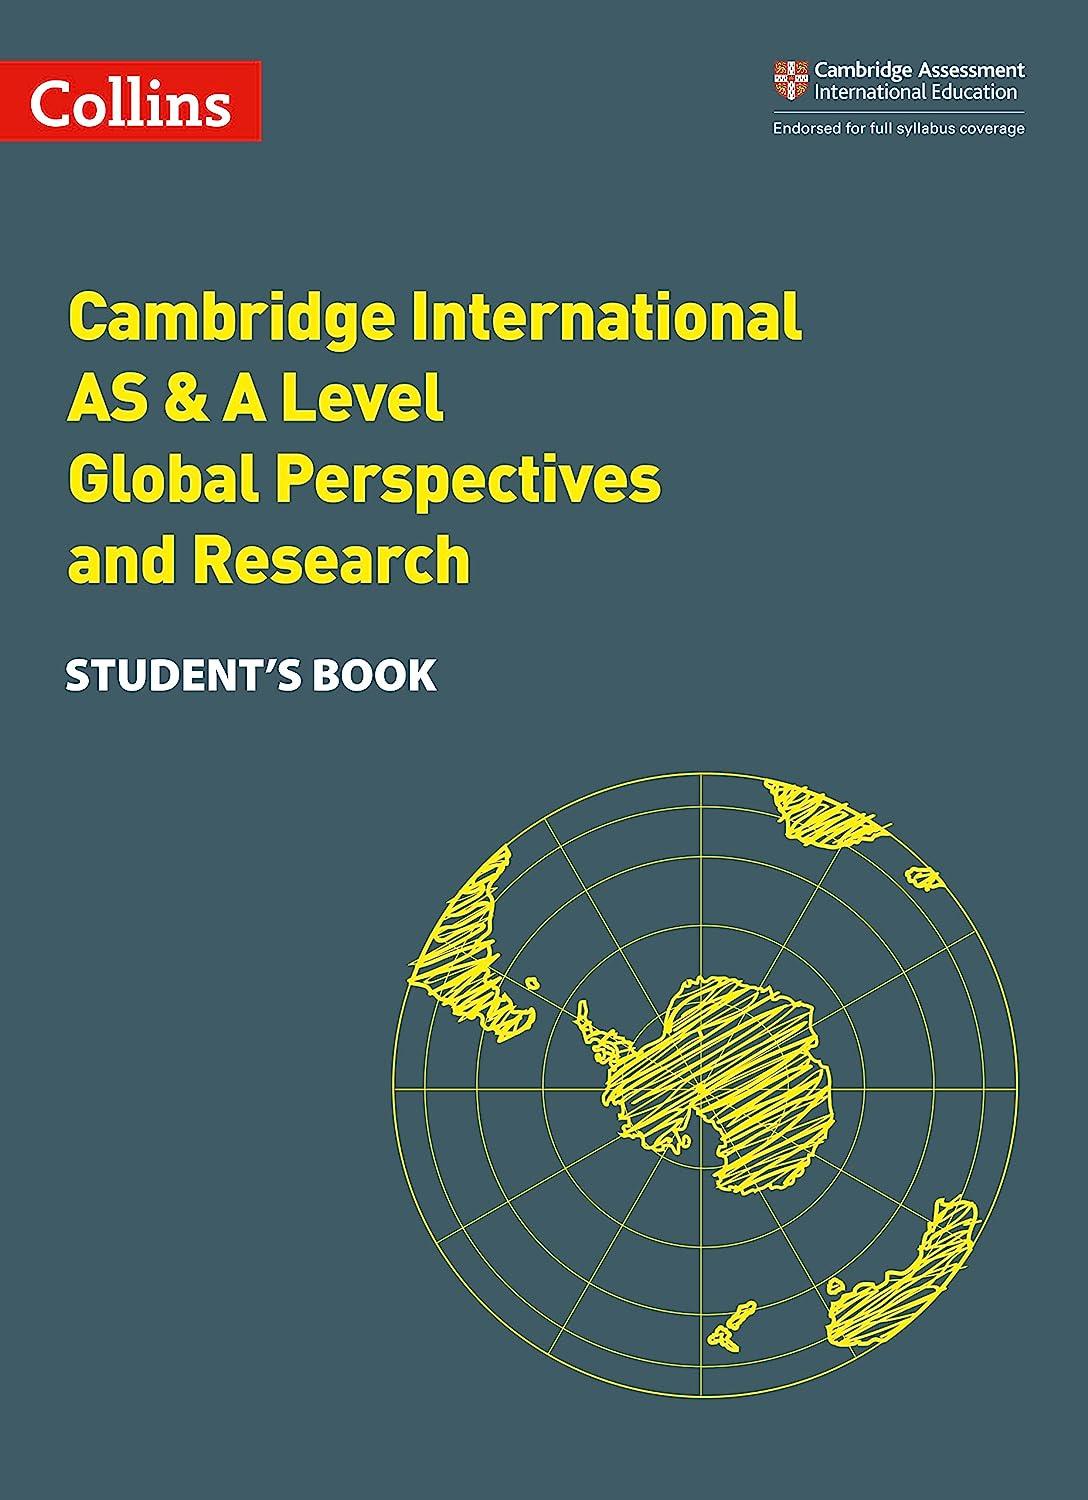 collins cambridge international as and a level global perspectives students book 1st edition collins uk